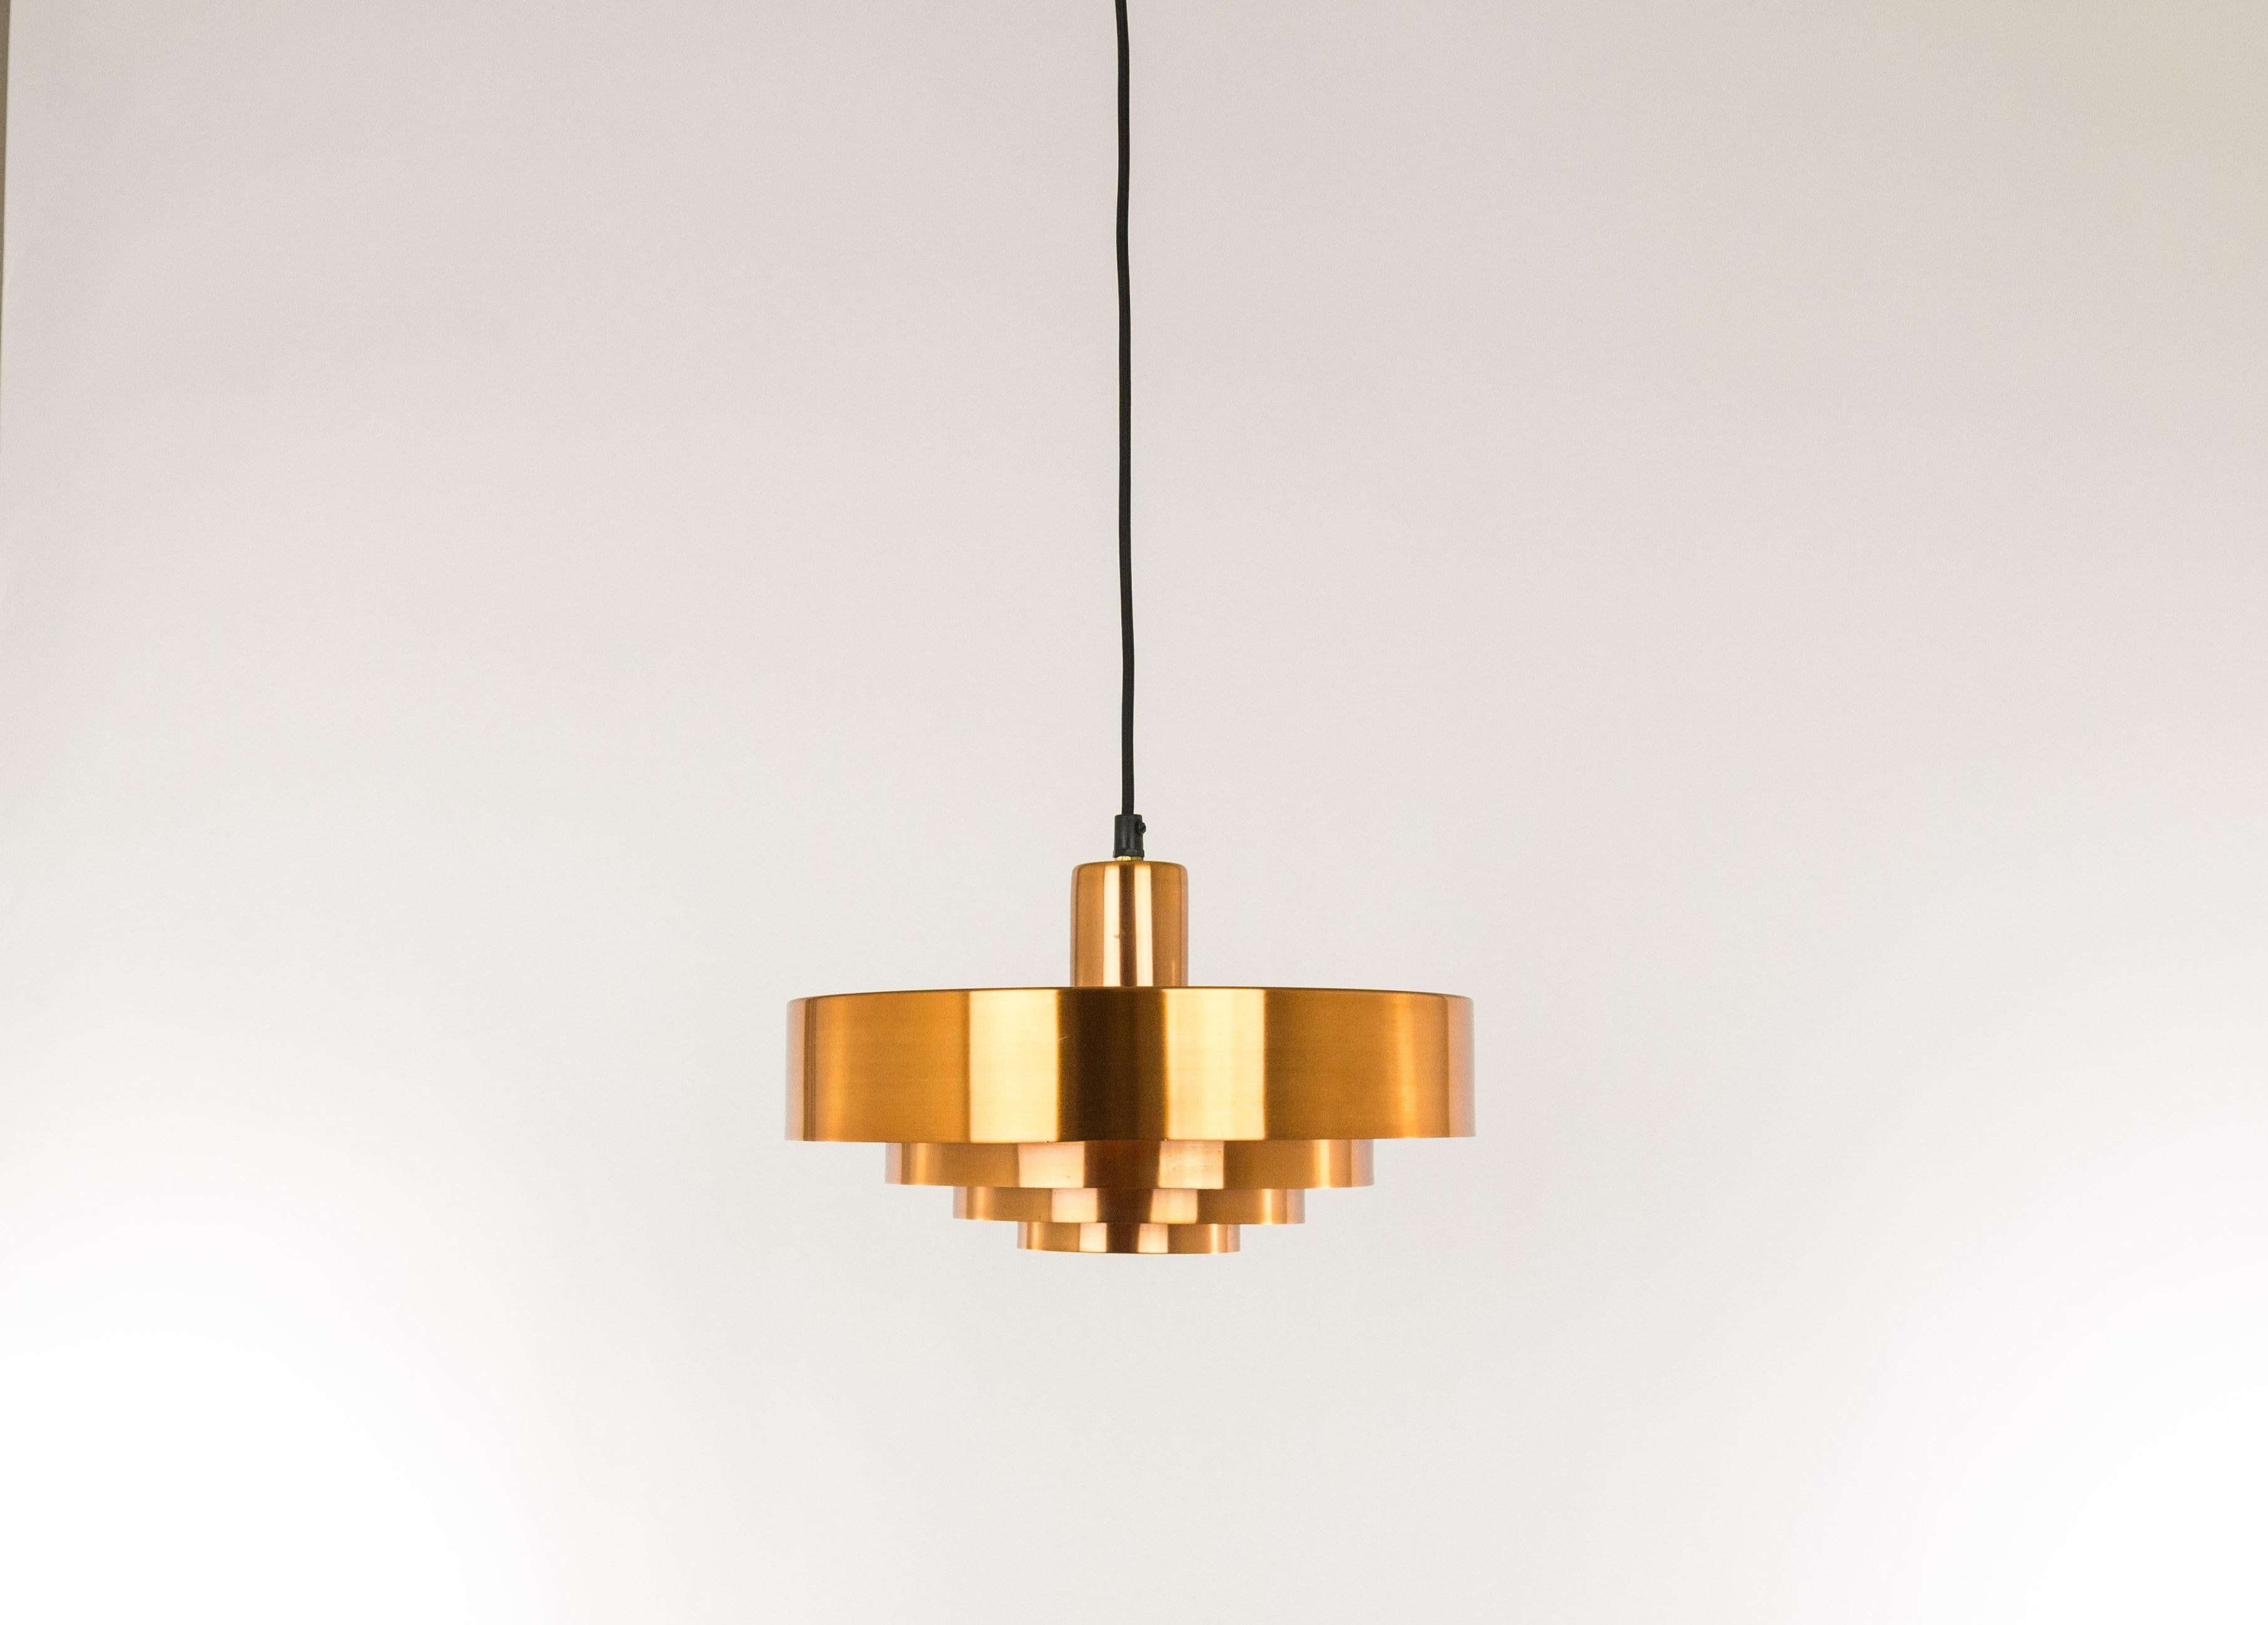 Copper Roulet pendant designed by Jo Hammerborg in 1963 and produced by Fog & Mørup in Denmark.

The lamp consists of four rings encompassing each other. Roulet was only produced in solid copper. Specific to this lamp is that the orange lacquer on